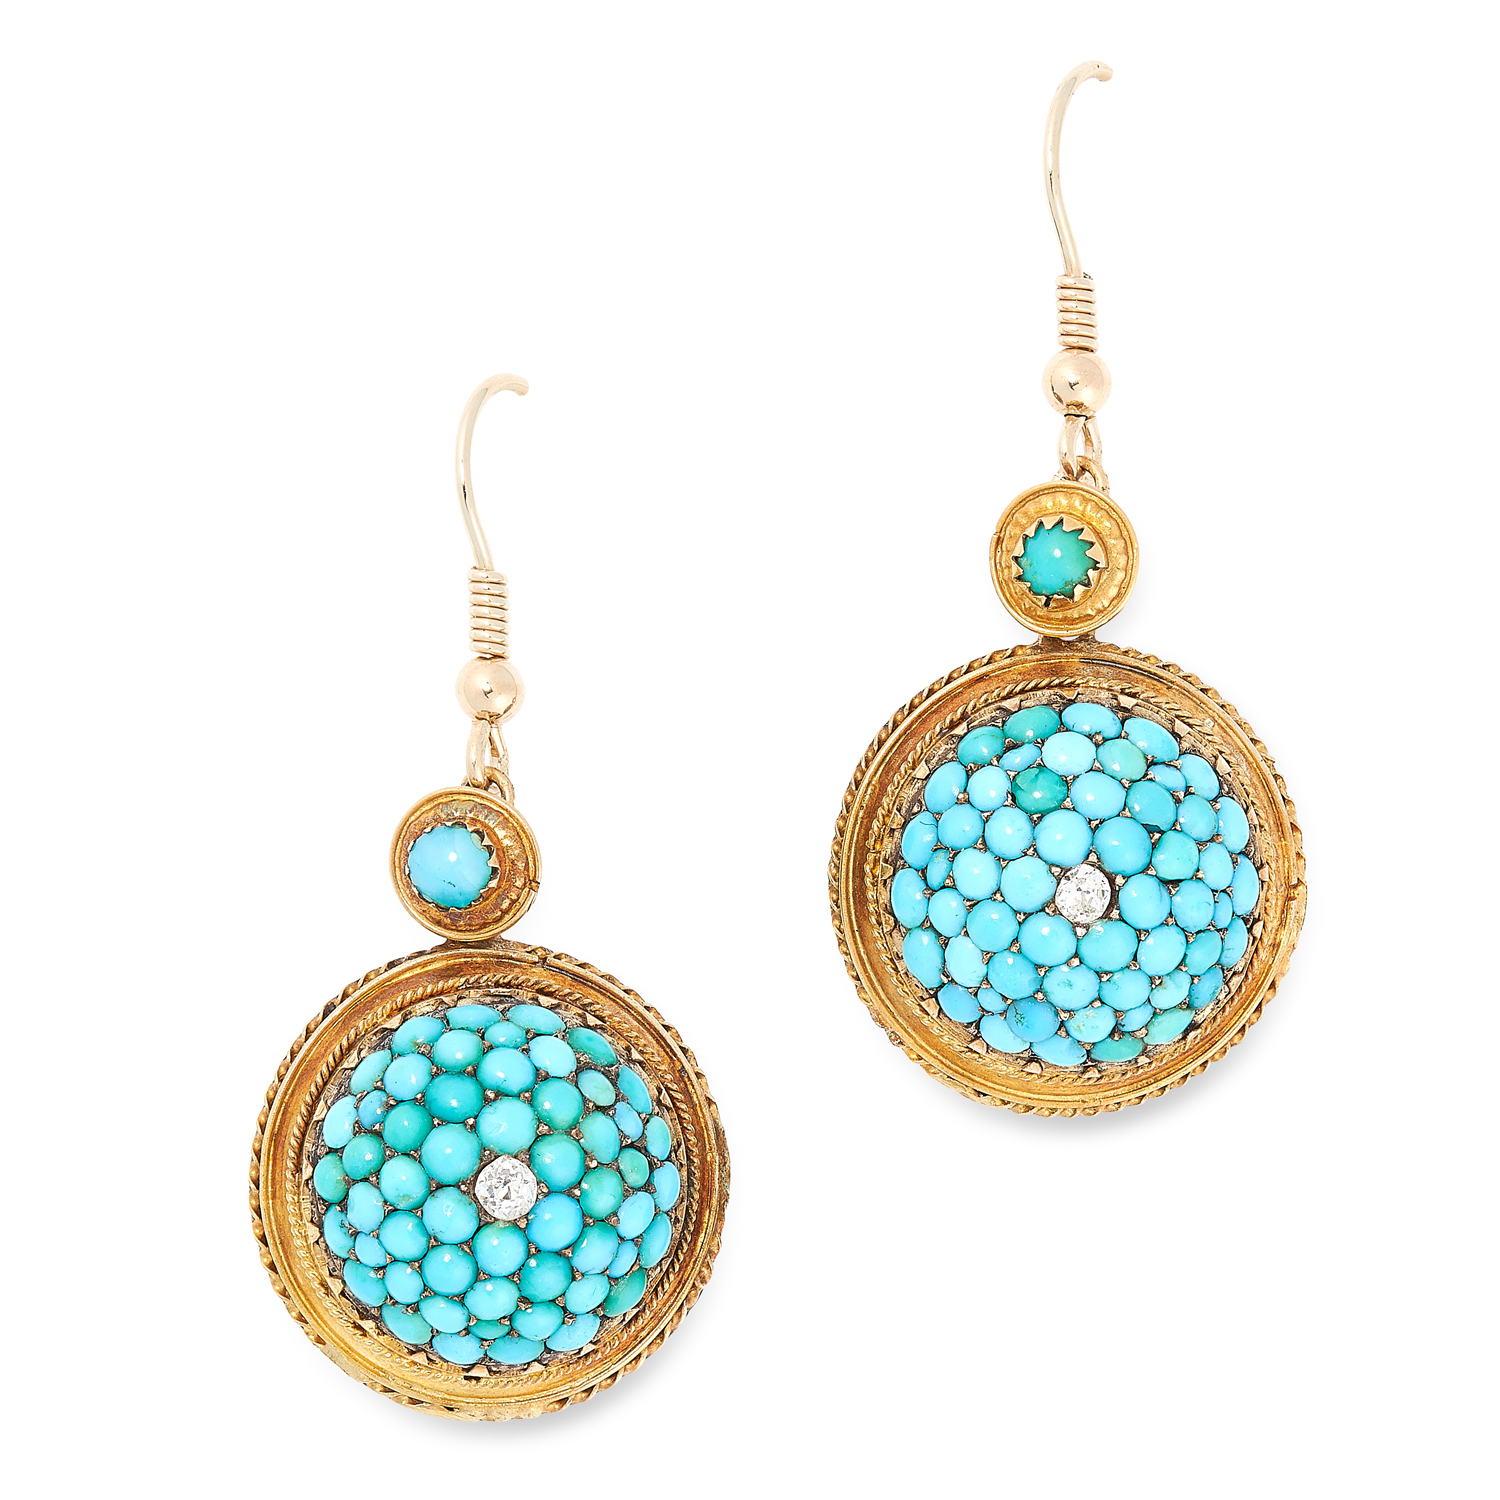 A PAIR OF ANTIQUE TURQUOISE AND DIAMOND EARRINGS in circular form set with cabochon turquoise and an